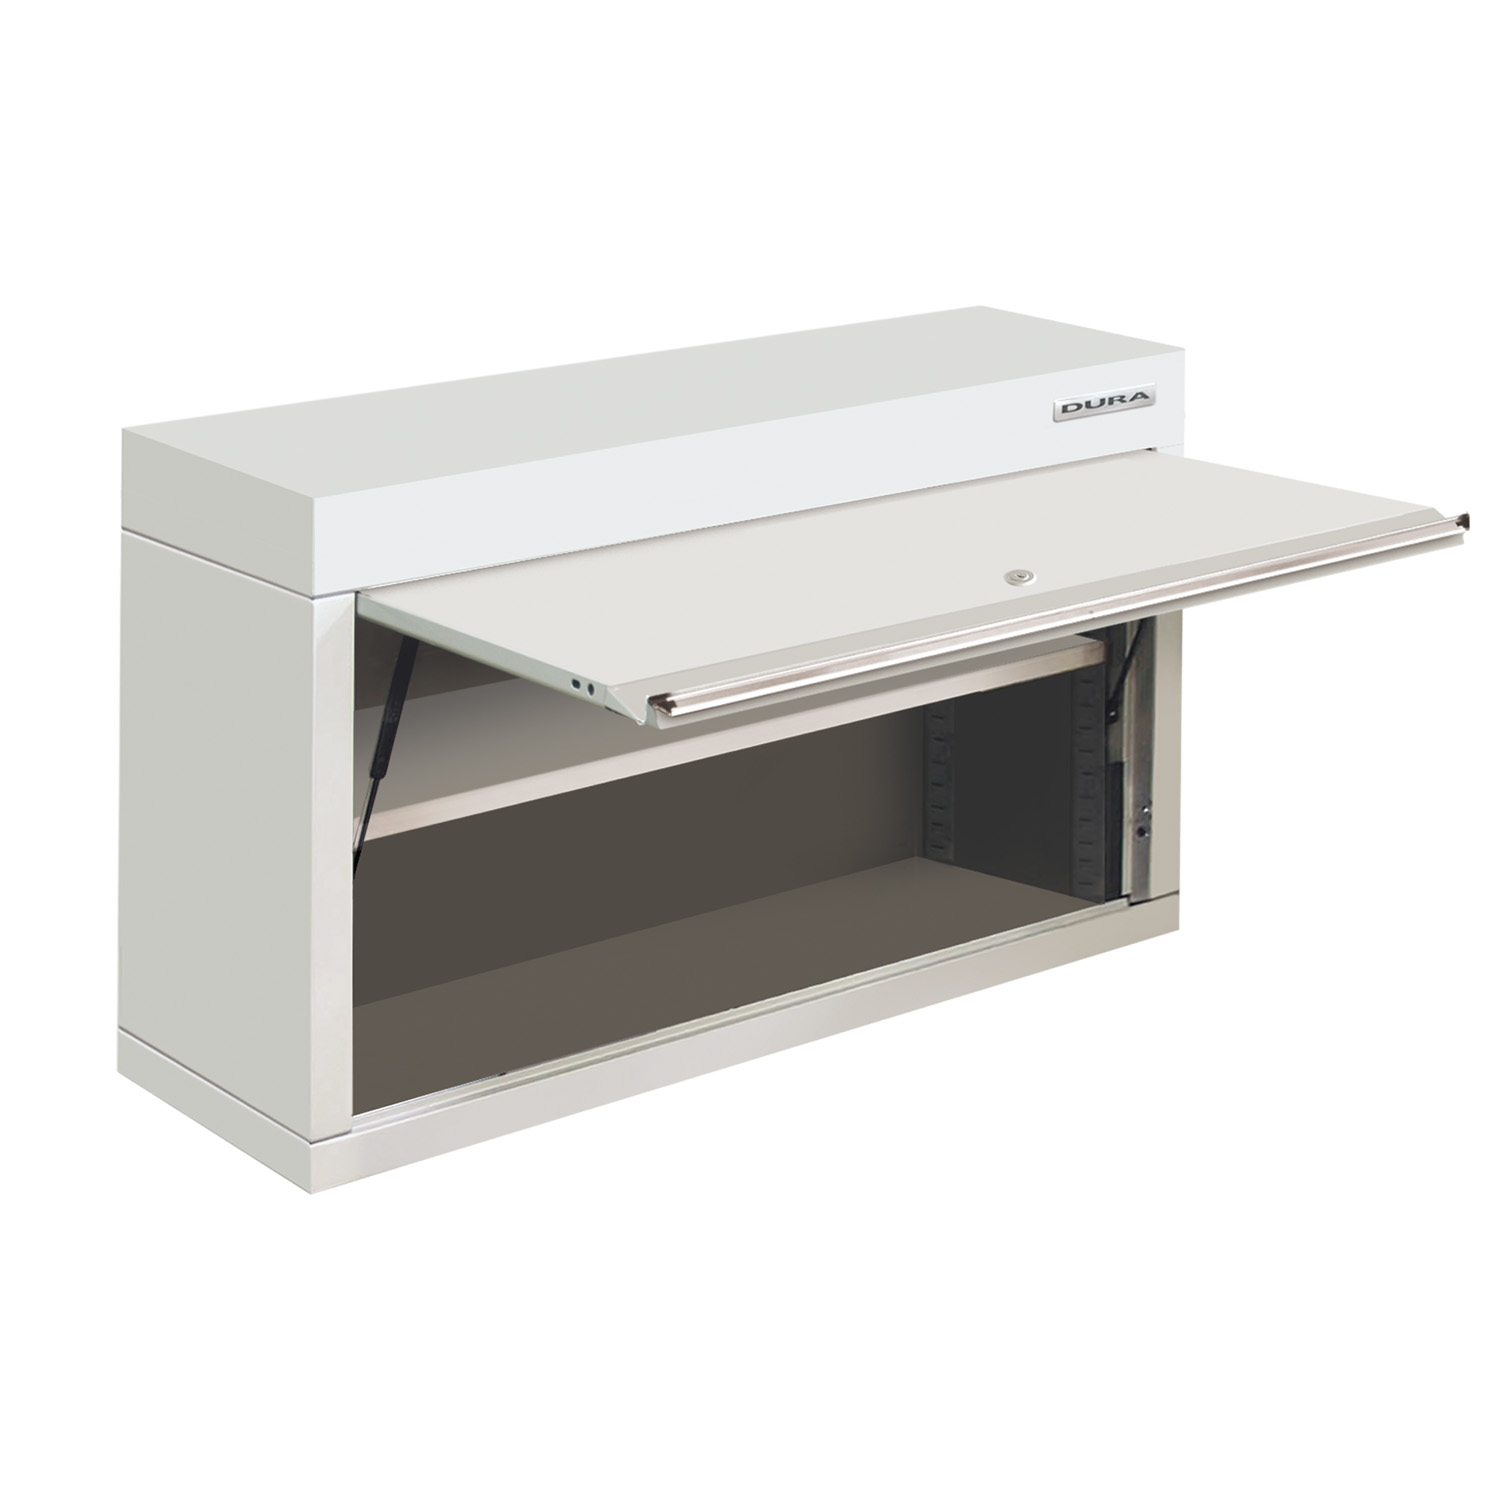 Wall cabinet with shelf (1200mm)